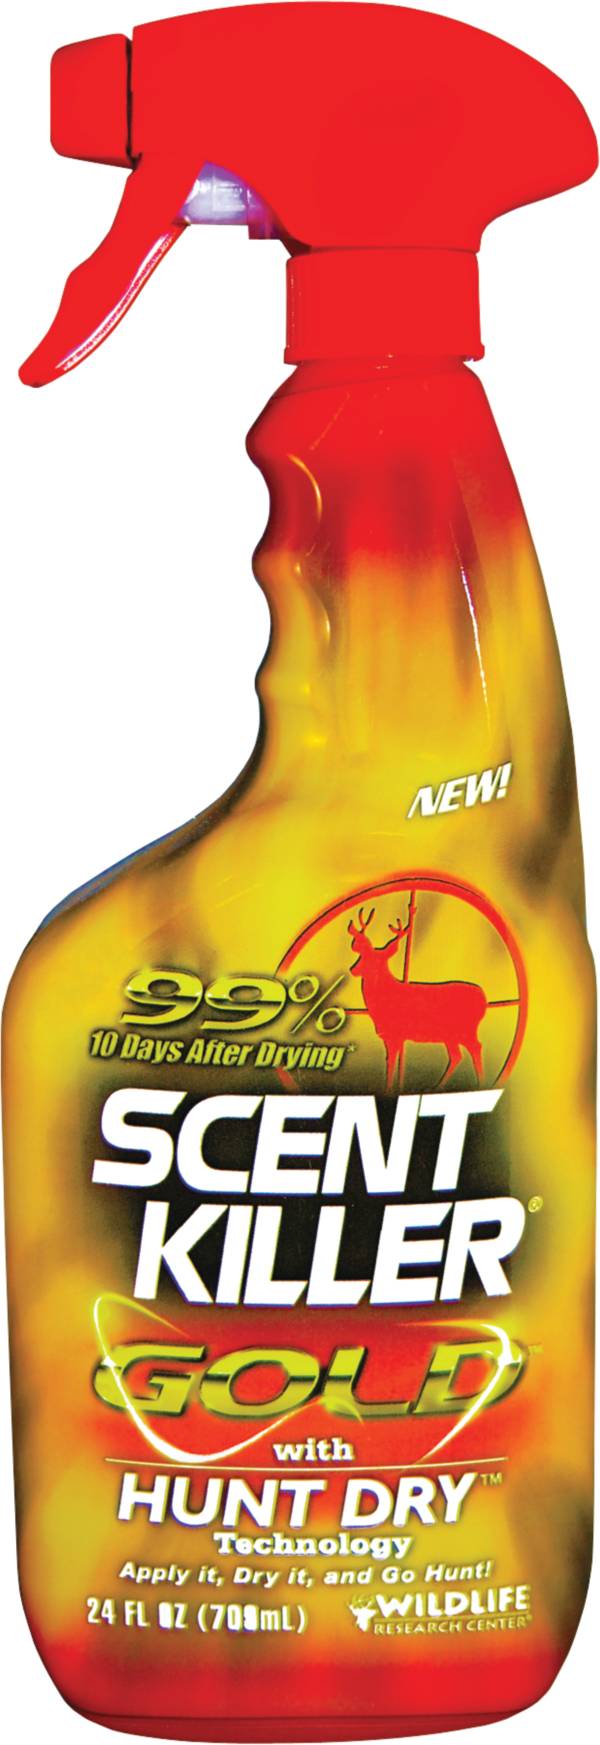 Wildlife Research Center Scent Killer Gold Clothing Spray product image